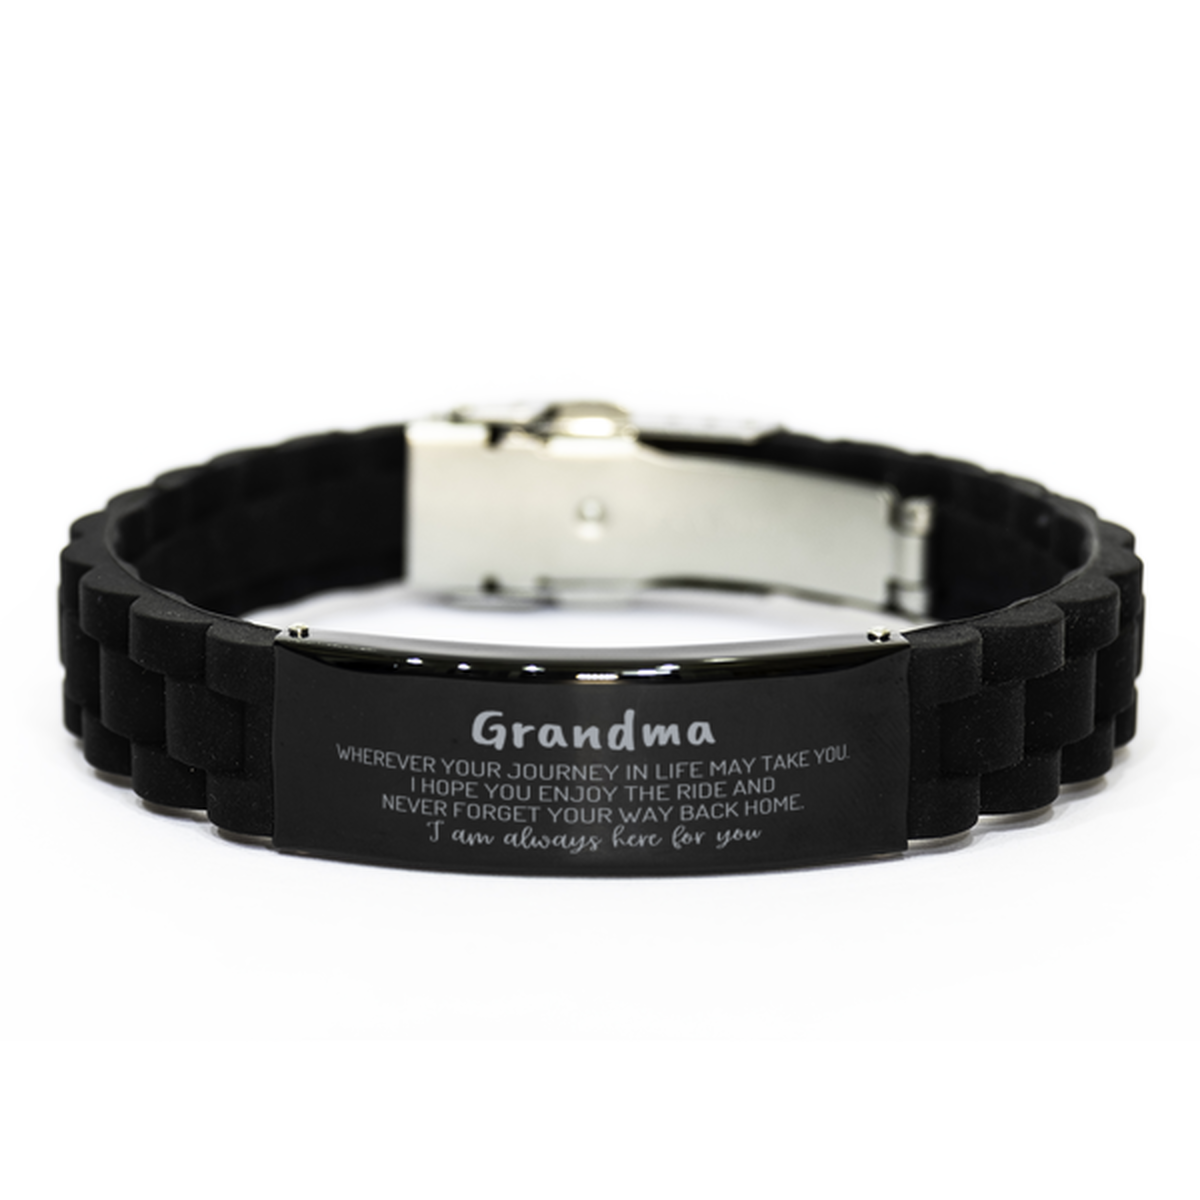 Grandma wherever your journey in life may take you, I am always here for you Grandma Black Glidelock Clasp Bracelet, Awesome Christmas Gifts For Grandma, Grandma Birthday Gifts for Men Women Family Loved One